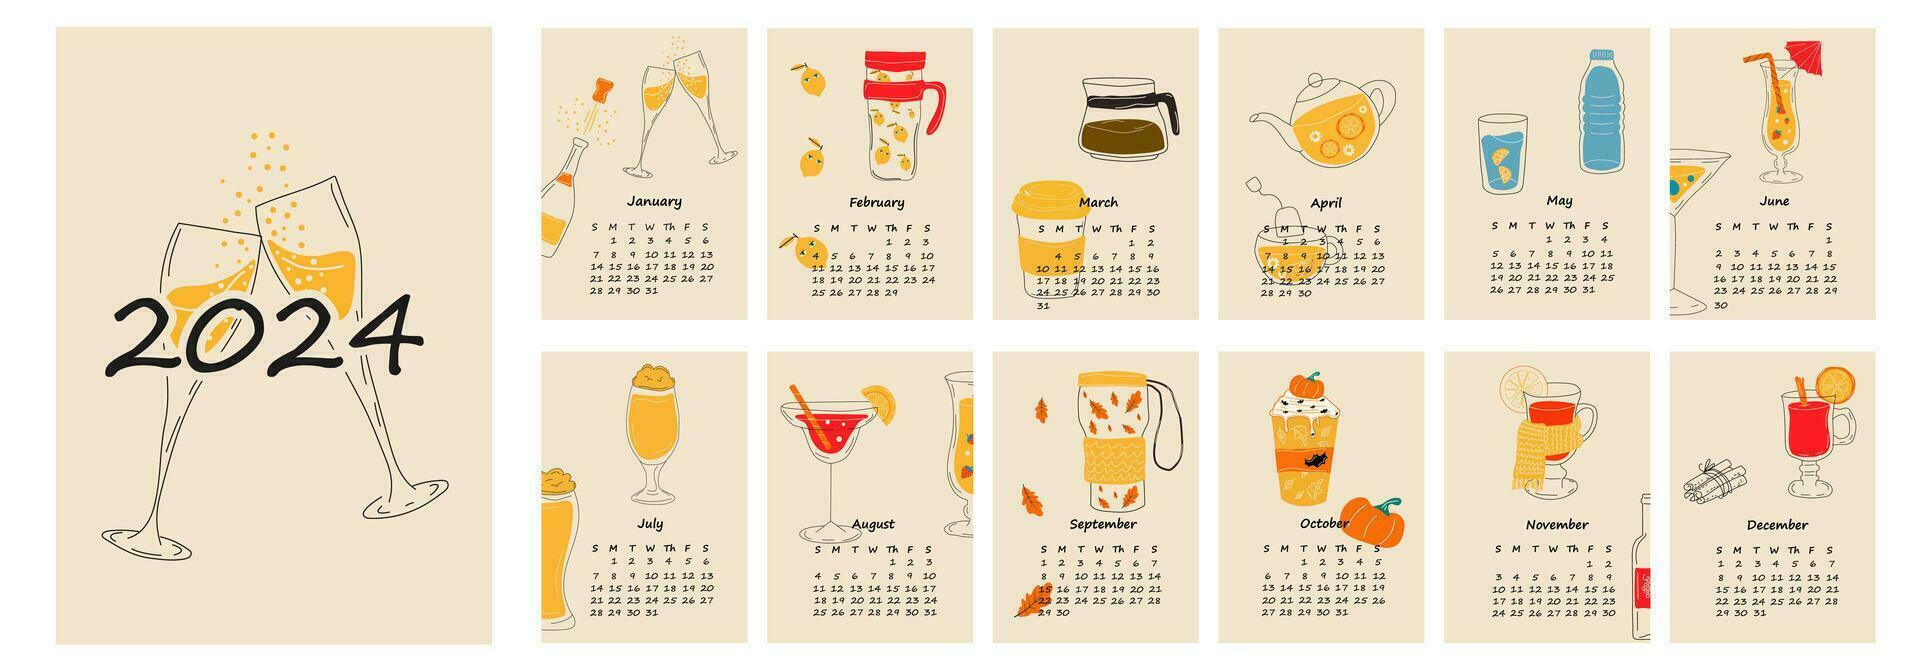 2024 calendar design with different drinks for different seasons. Hand drawn calendar planner minimal style, annual organizer. Vector illustration.